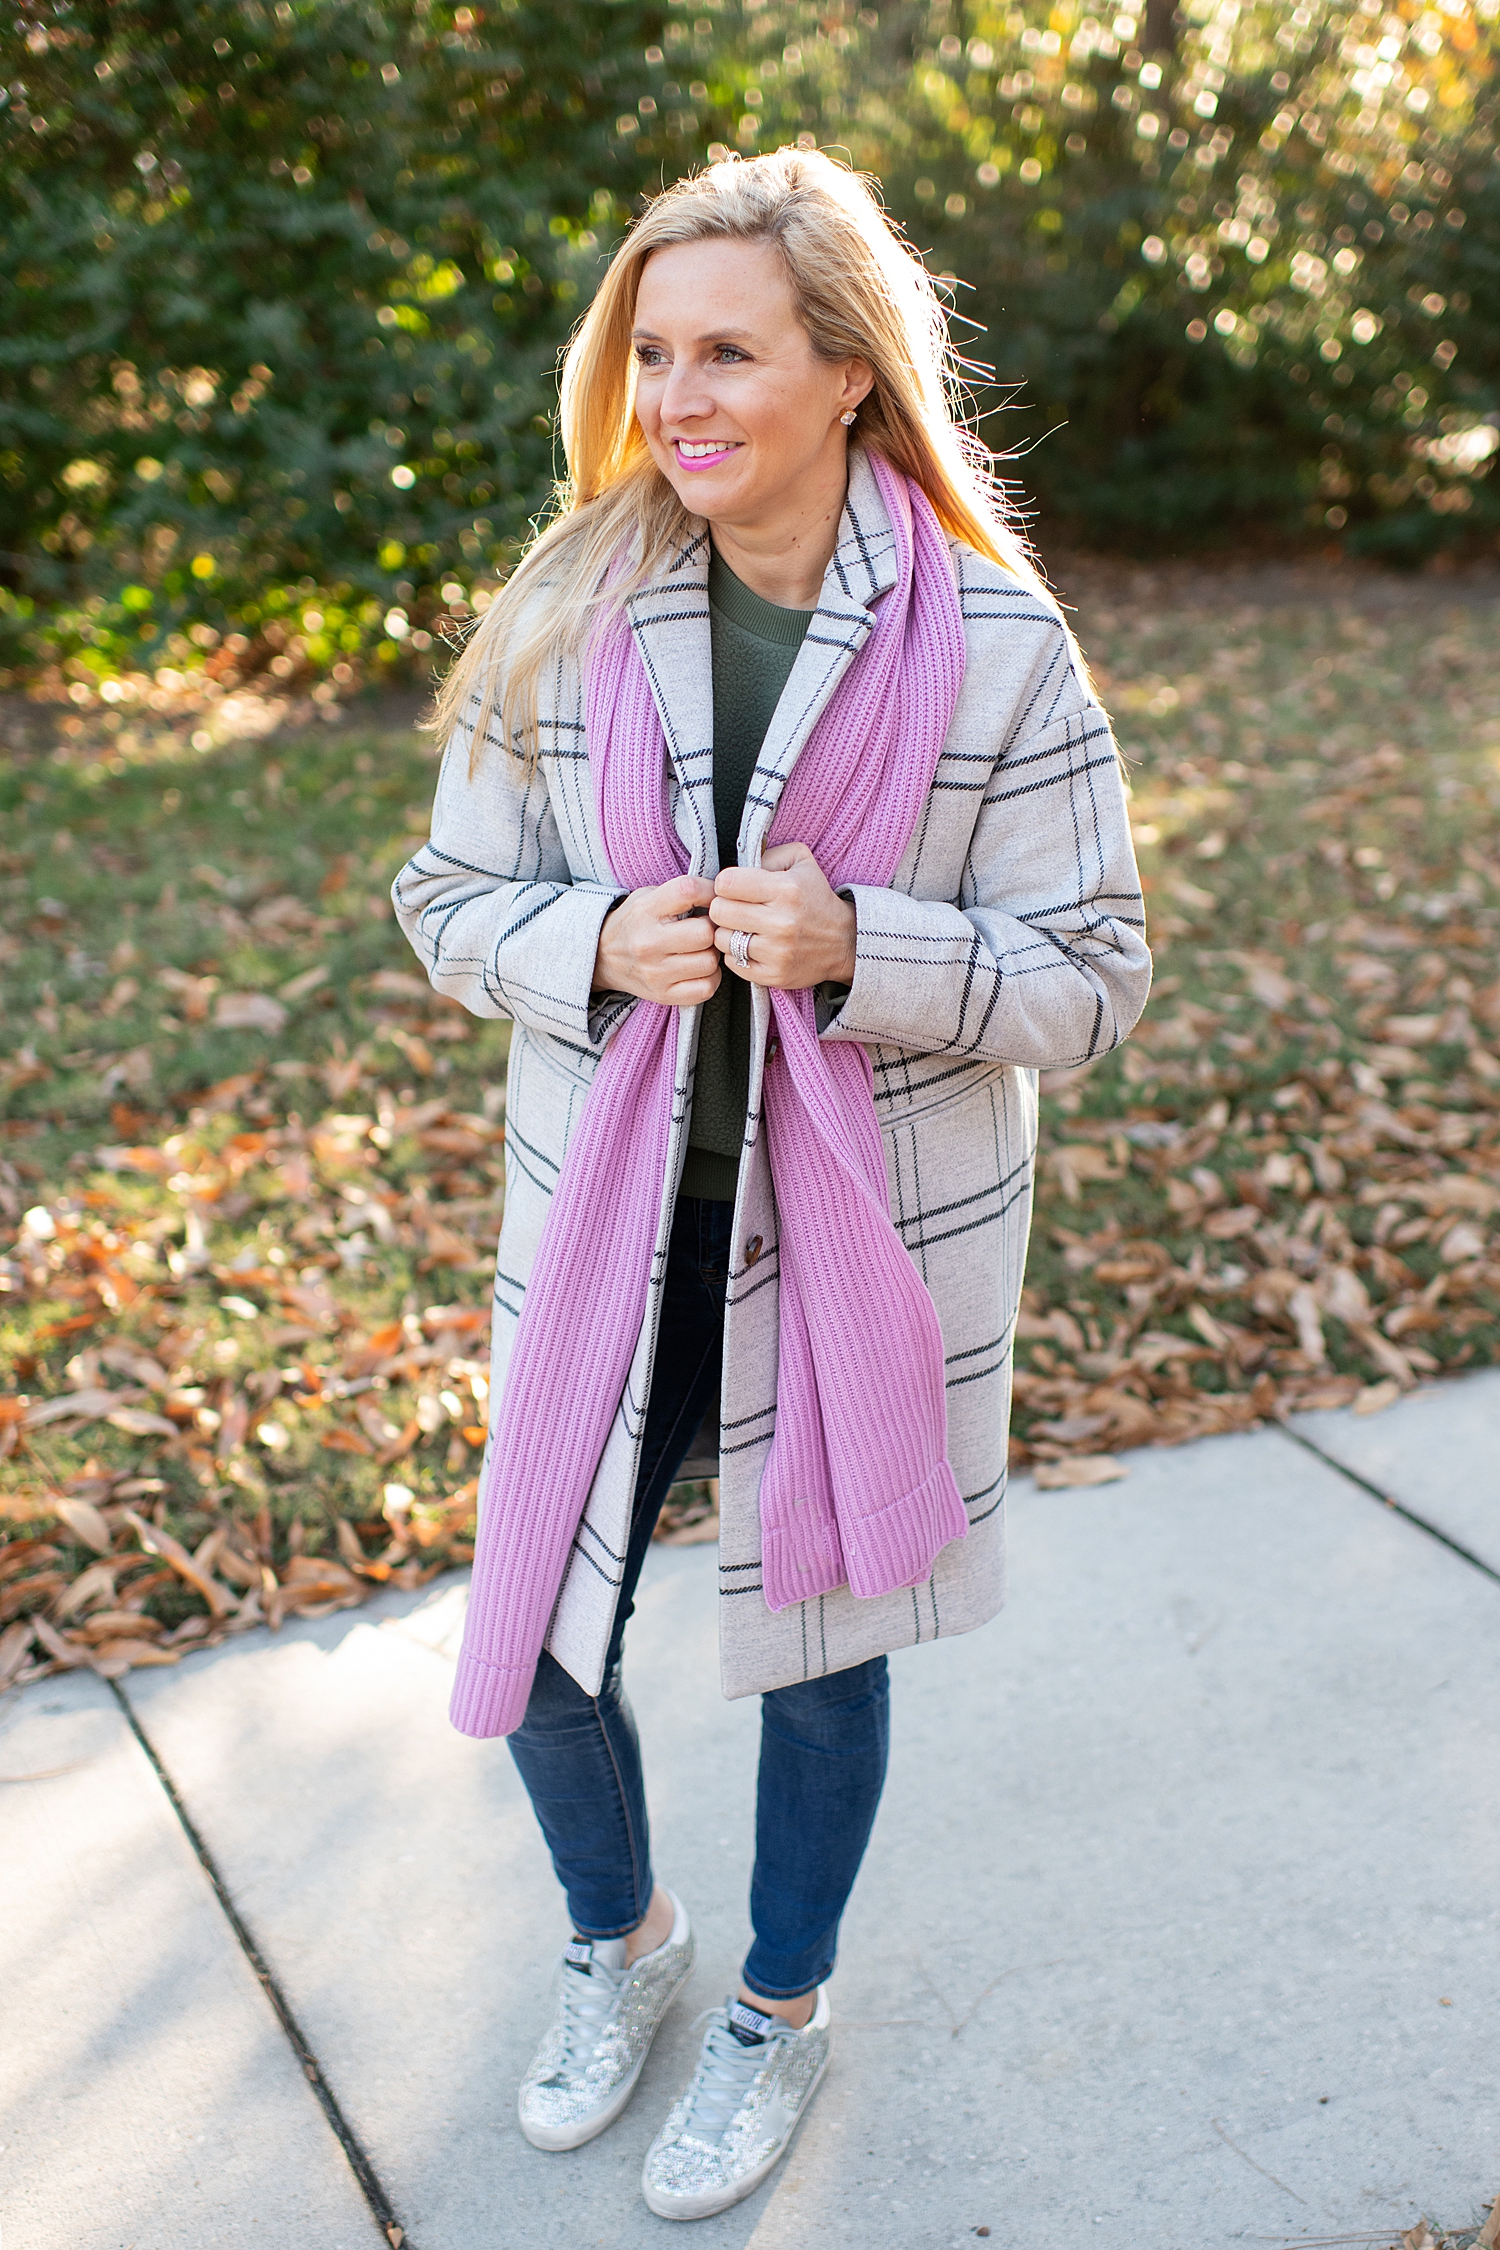 The Best Cozy Gift Ideas featured by top Houston fashion blogger, Fancy Ashley: picture of a blonde woman wearing an Everlane green cocoon coat, an Everlane cashmere scarf, an Everyone cashmere beanie, green Everlane fleece sweatshirt, J.Crew tartan shirt, J.Crew skinny jeans and Golden Goose sneakers